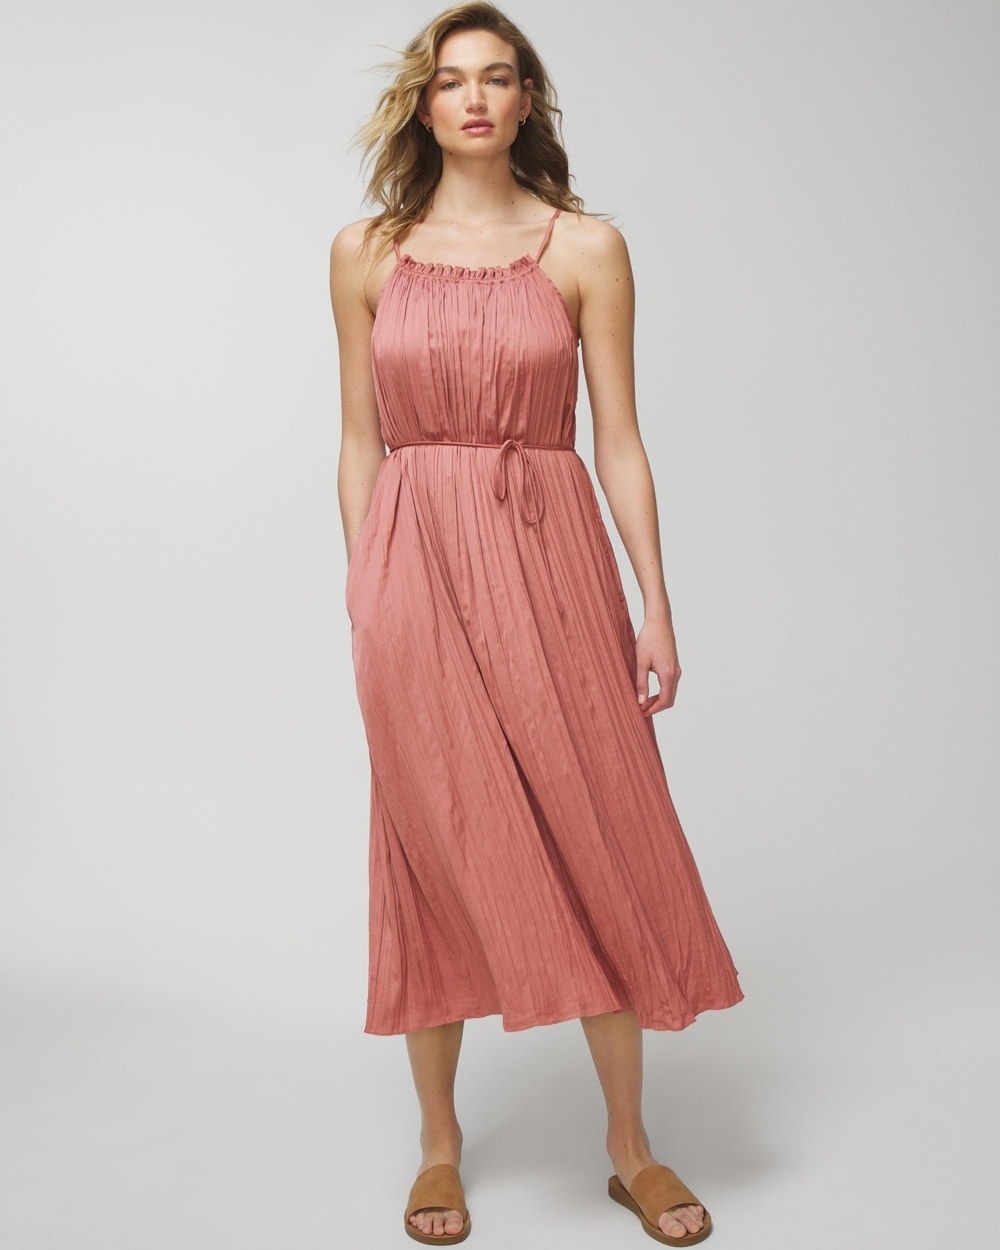 Soma Women's Satin Pleated Midi Sundress With Built-in Bra In Pink Size Large |